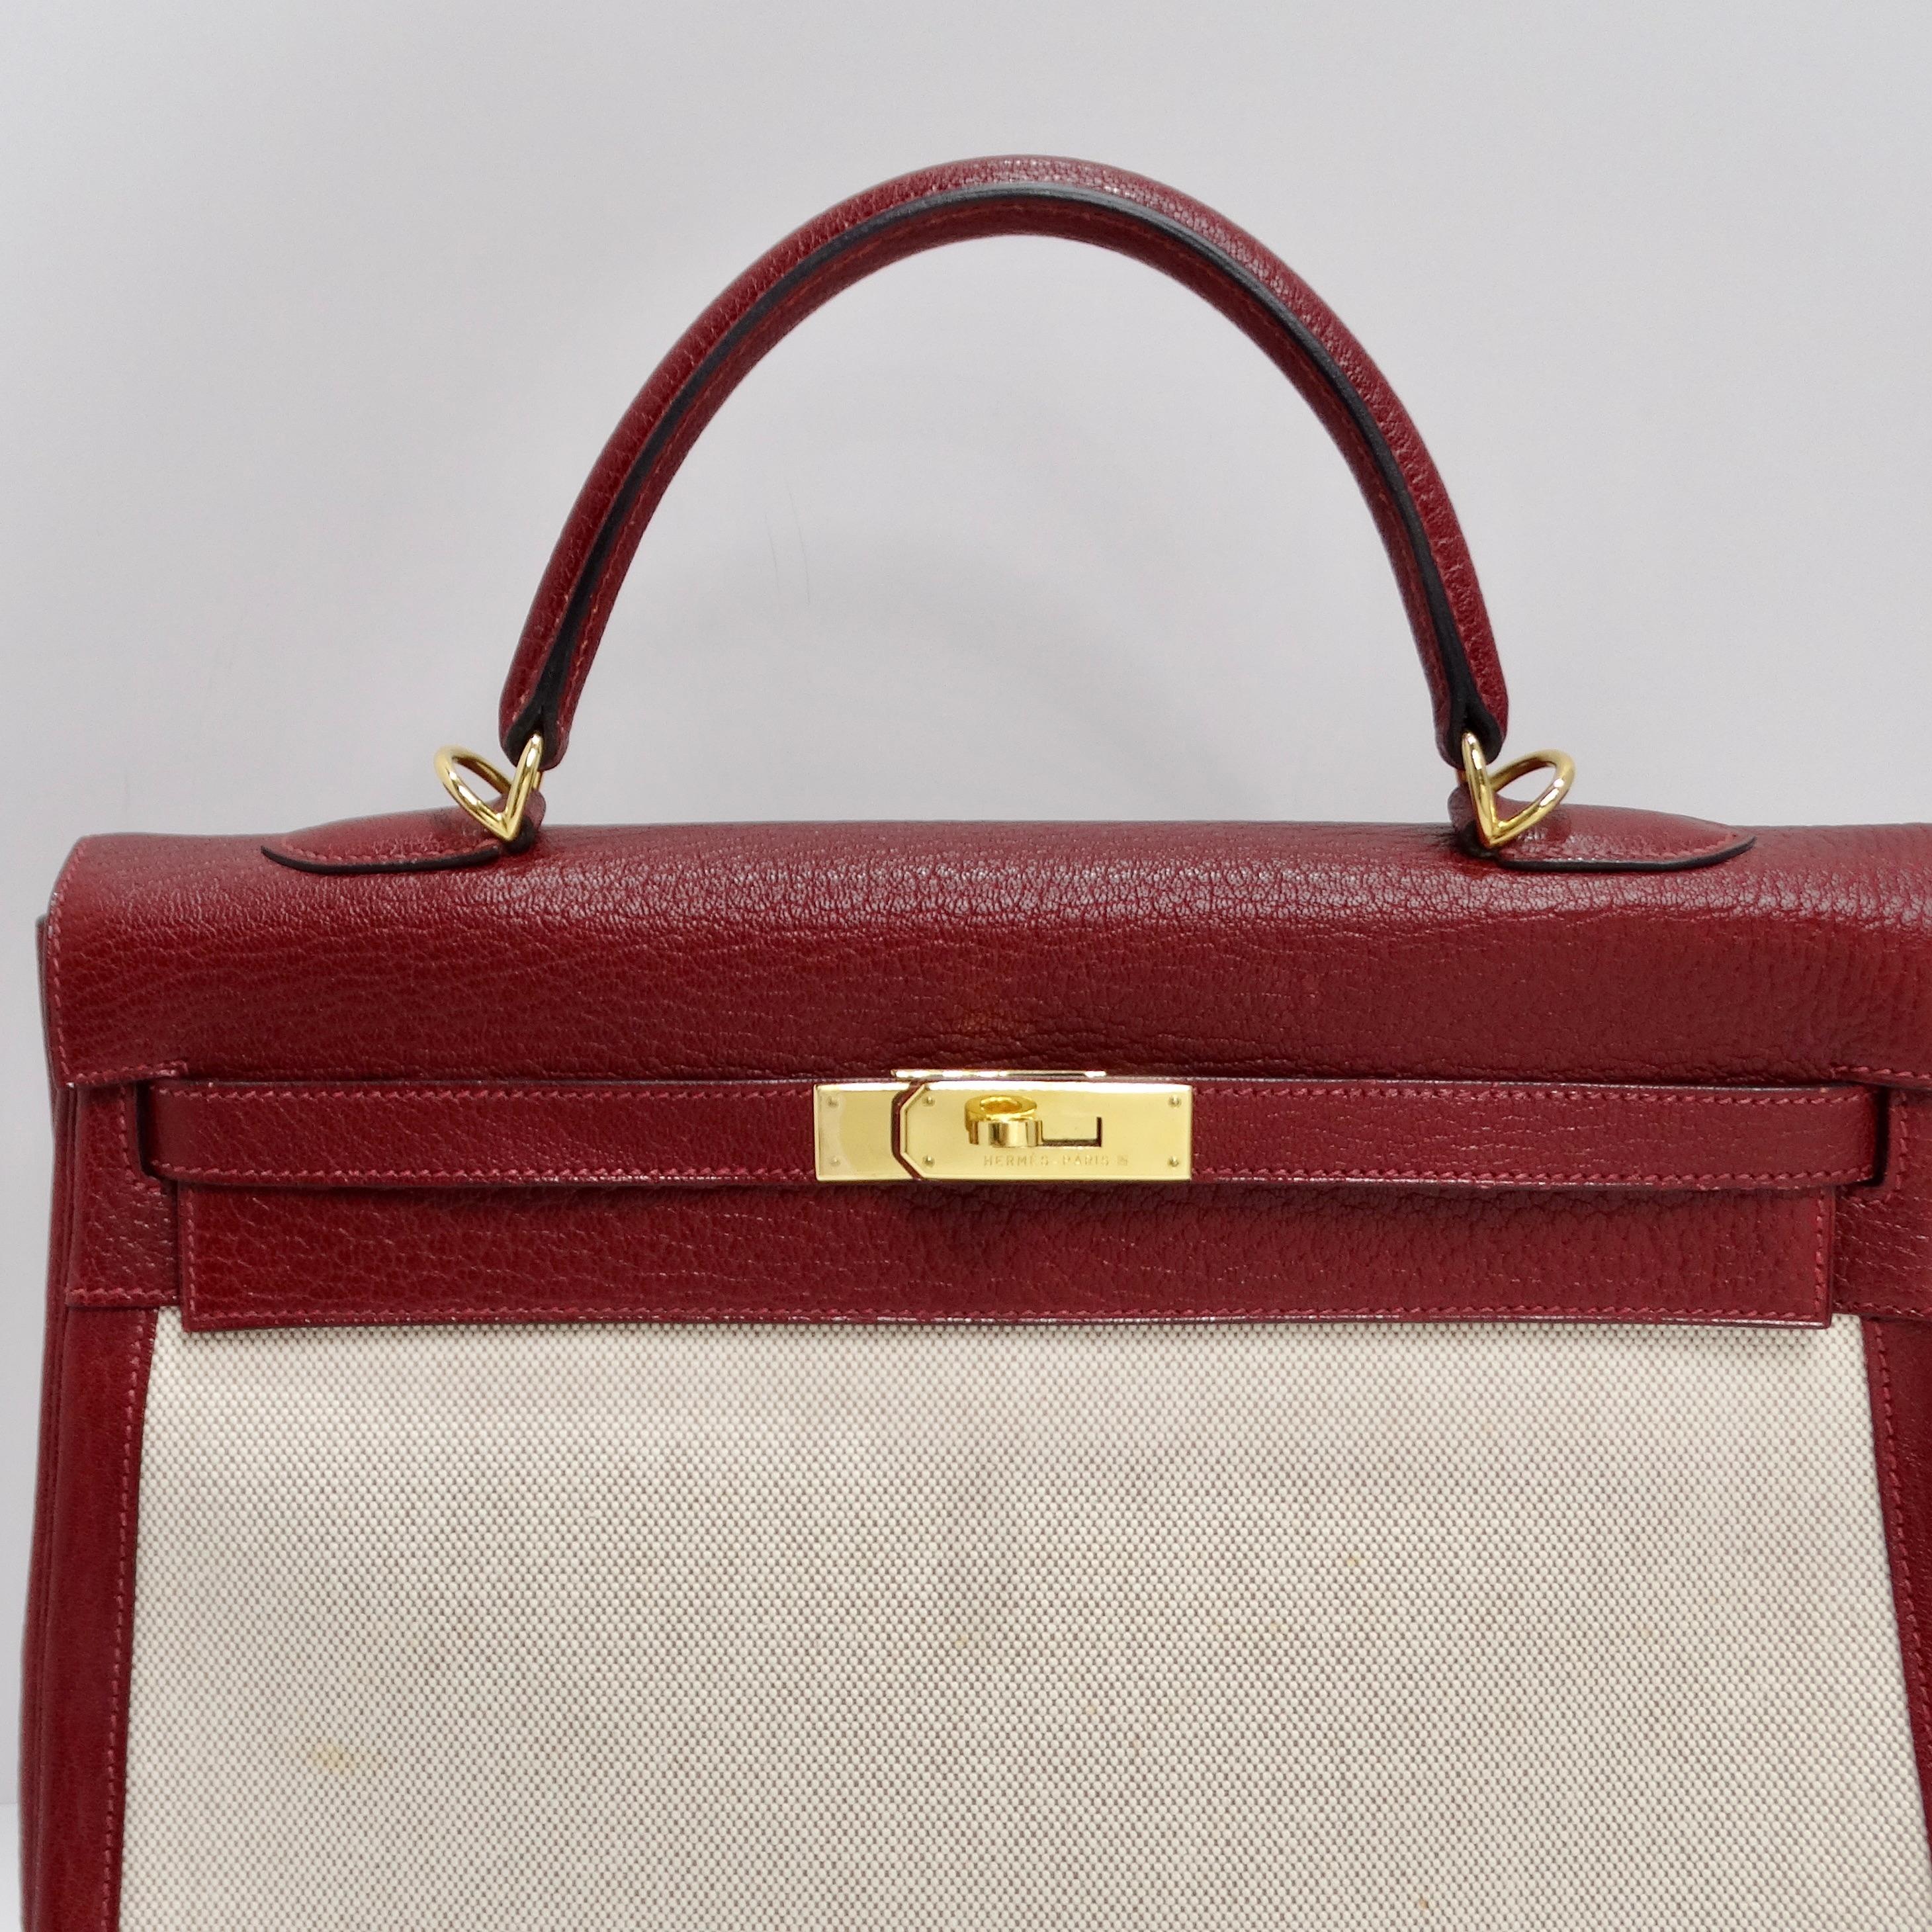 Introducing the Hermes 2000 Kelly Retourne 25 Handbag, a timeless and iconic accessory that epitomizes luxury and sophistication. Crafted by Hermes, one of the most esteemed luxury fashion houses, this Kelly handbag is a coveted piece cherished by